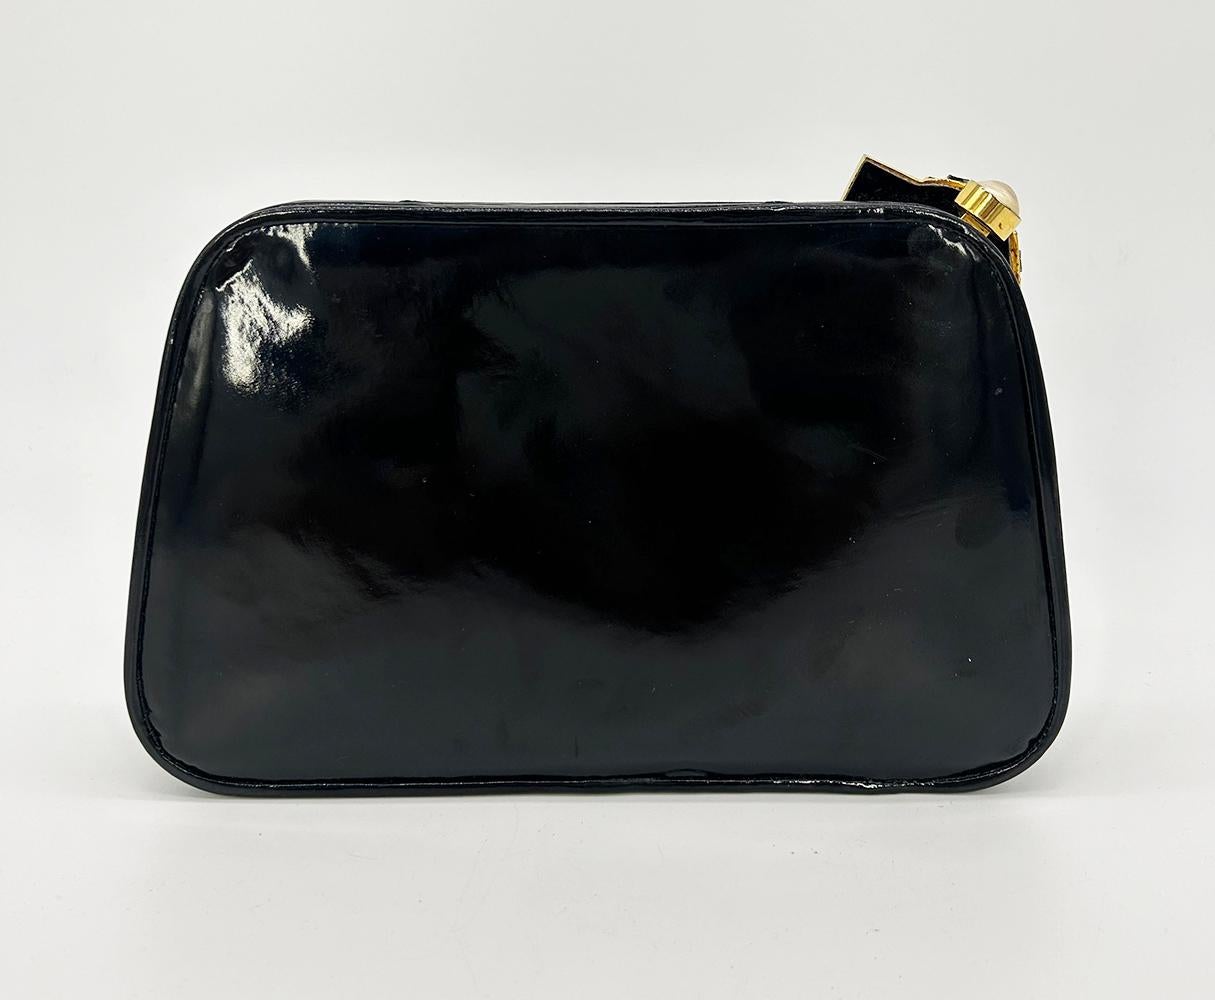 Judith Leiber Black Patent Leather Clutch In Good Condition For Sale In Philadelphia, PA